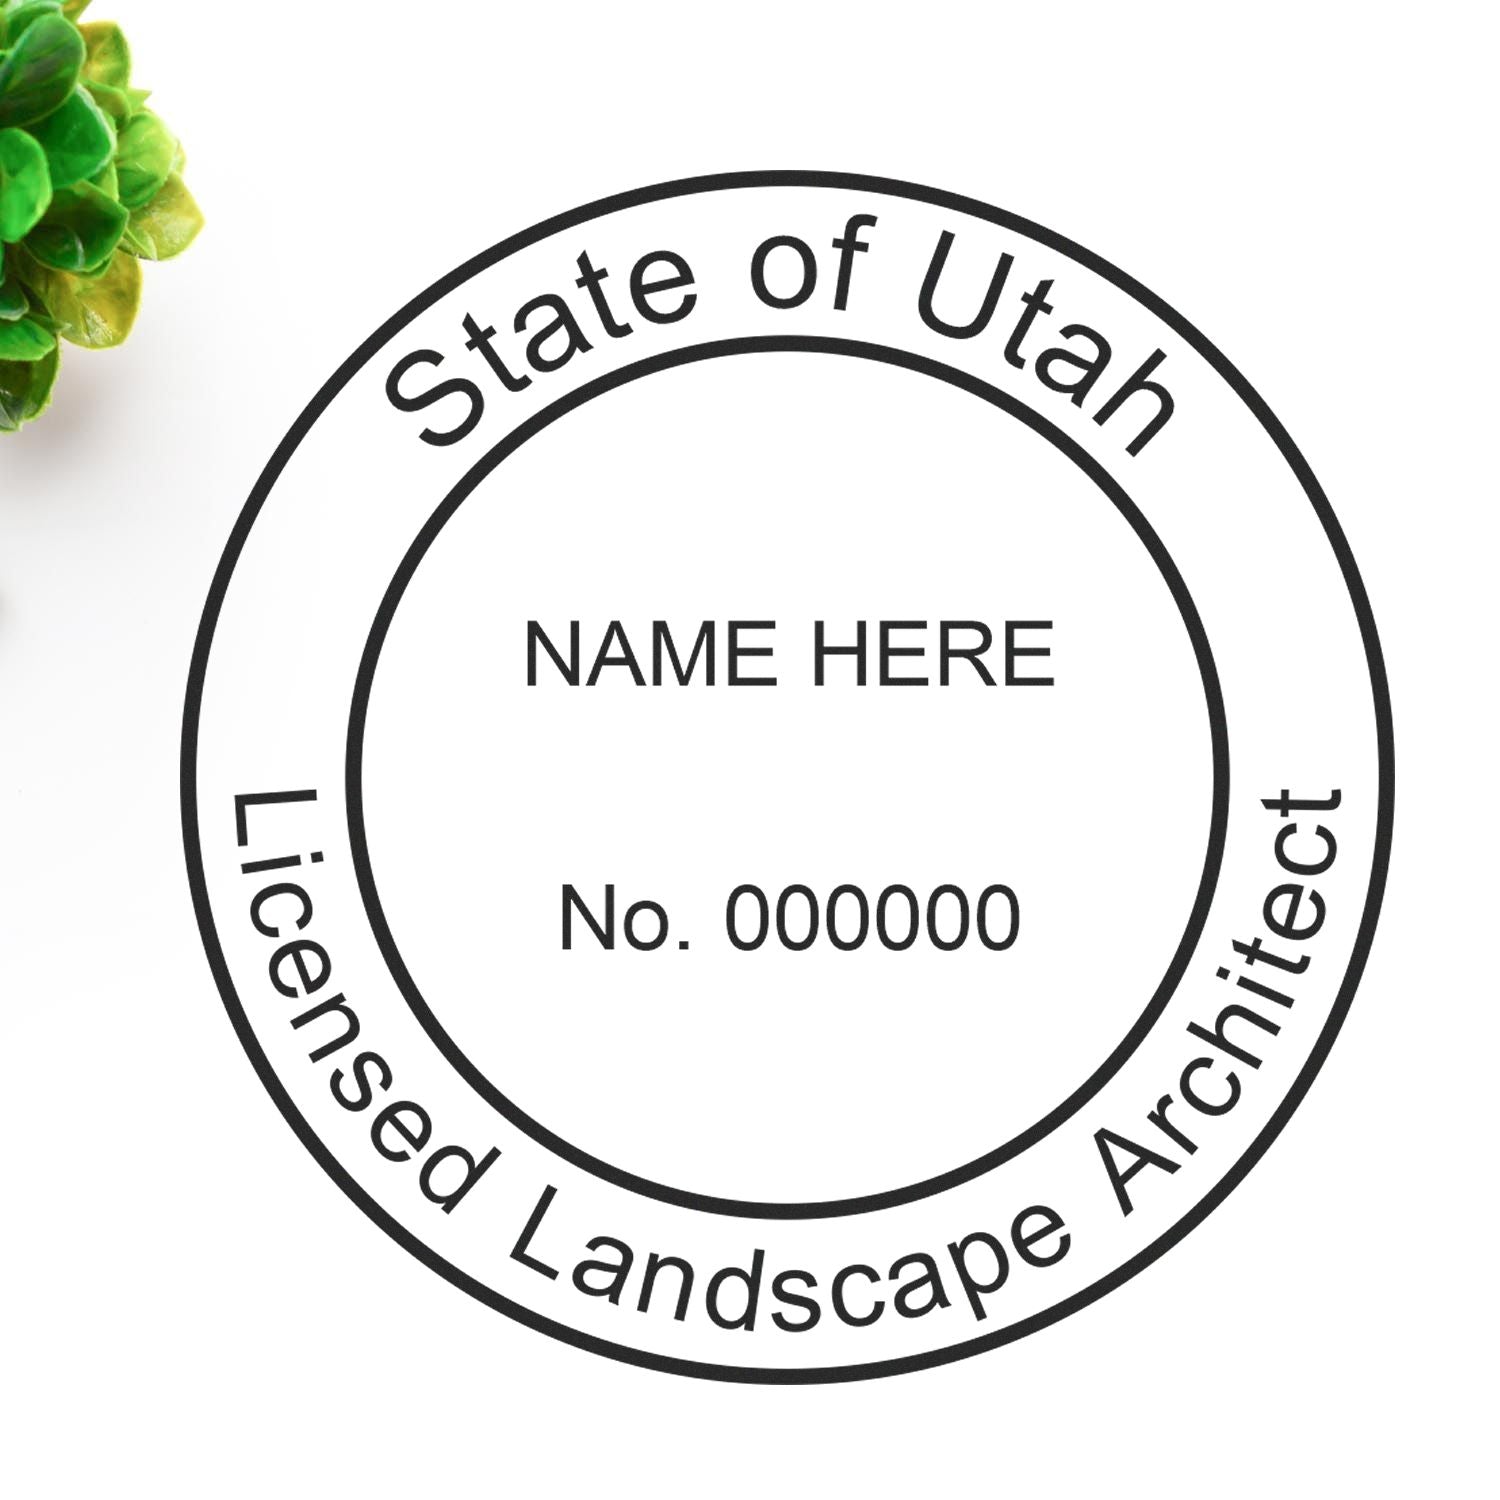 The main image for the Digital Utah Landscape Architect Stamp depicting a sample of the imprint and electronic files